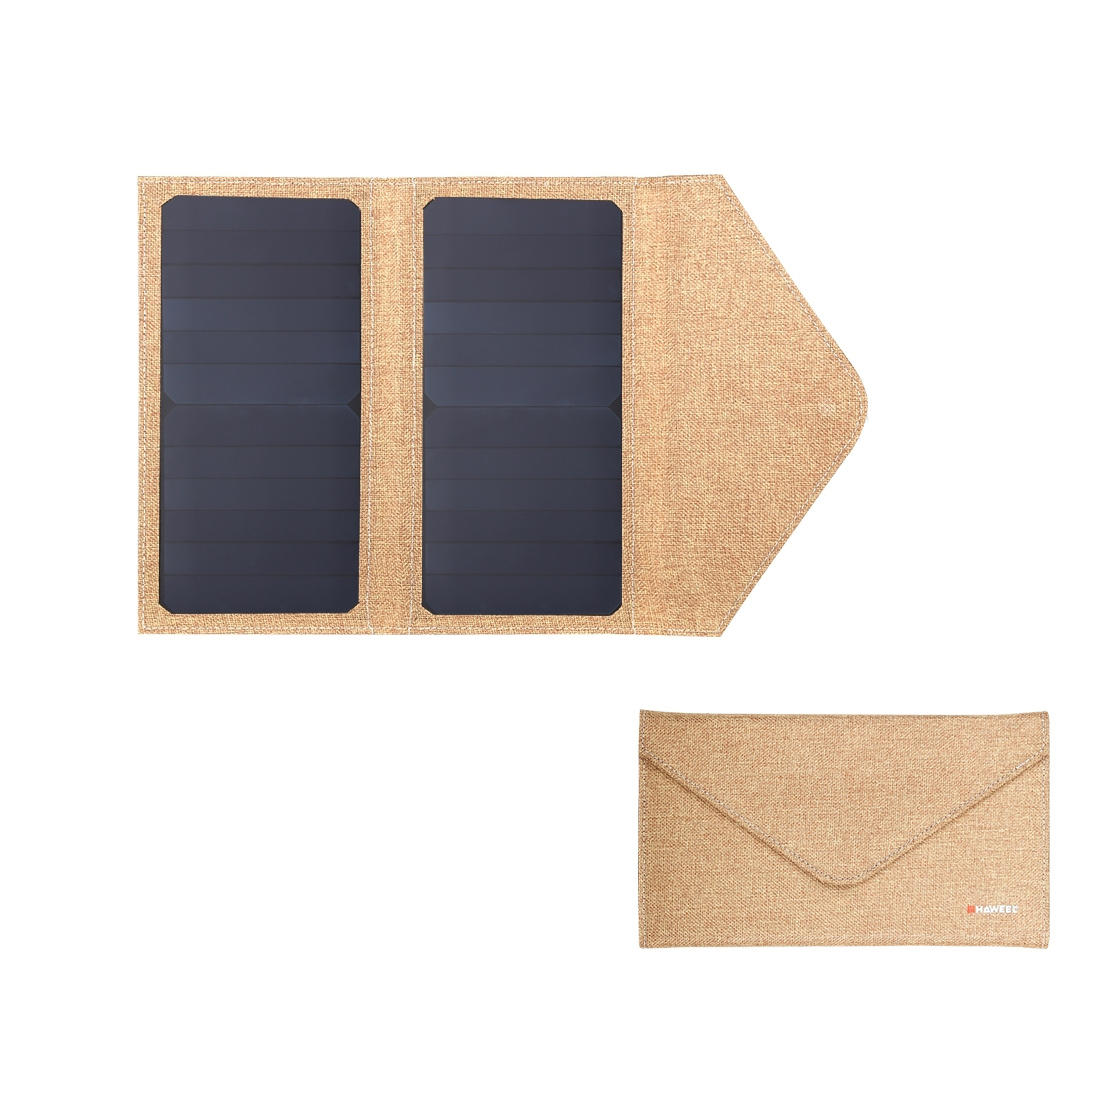 

14W 5V/2.1A 2-Fold Solar Panel Foldable Charger Bag Dual USB Outdoor Working